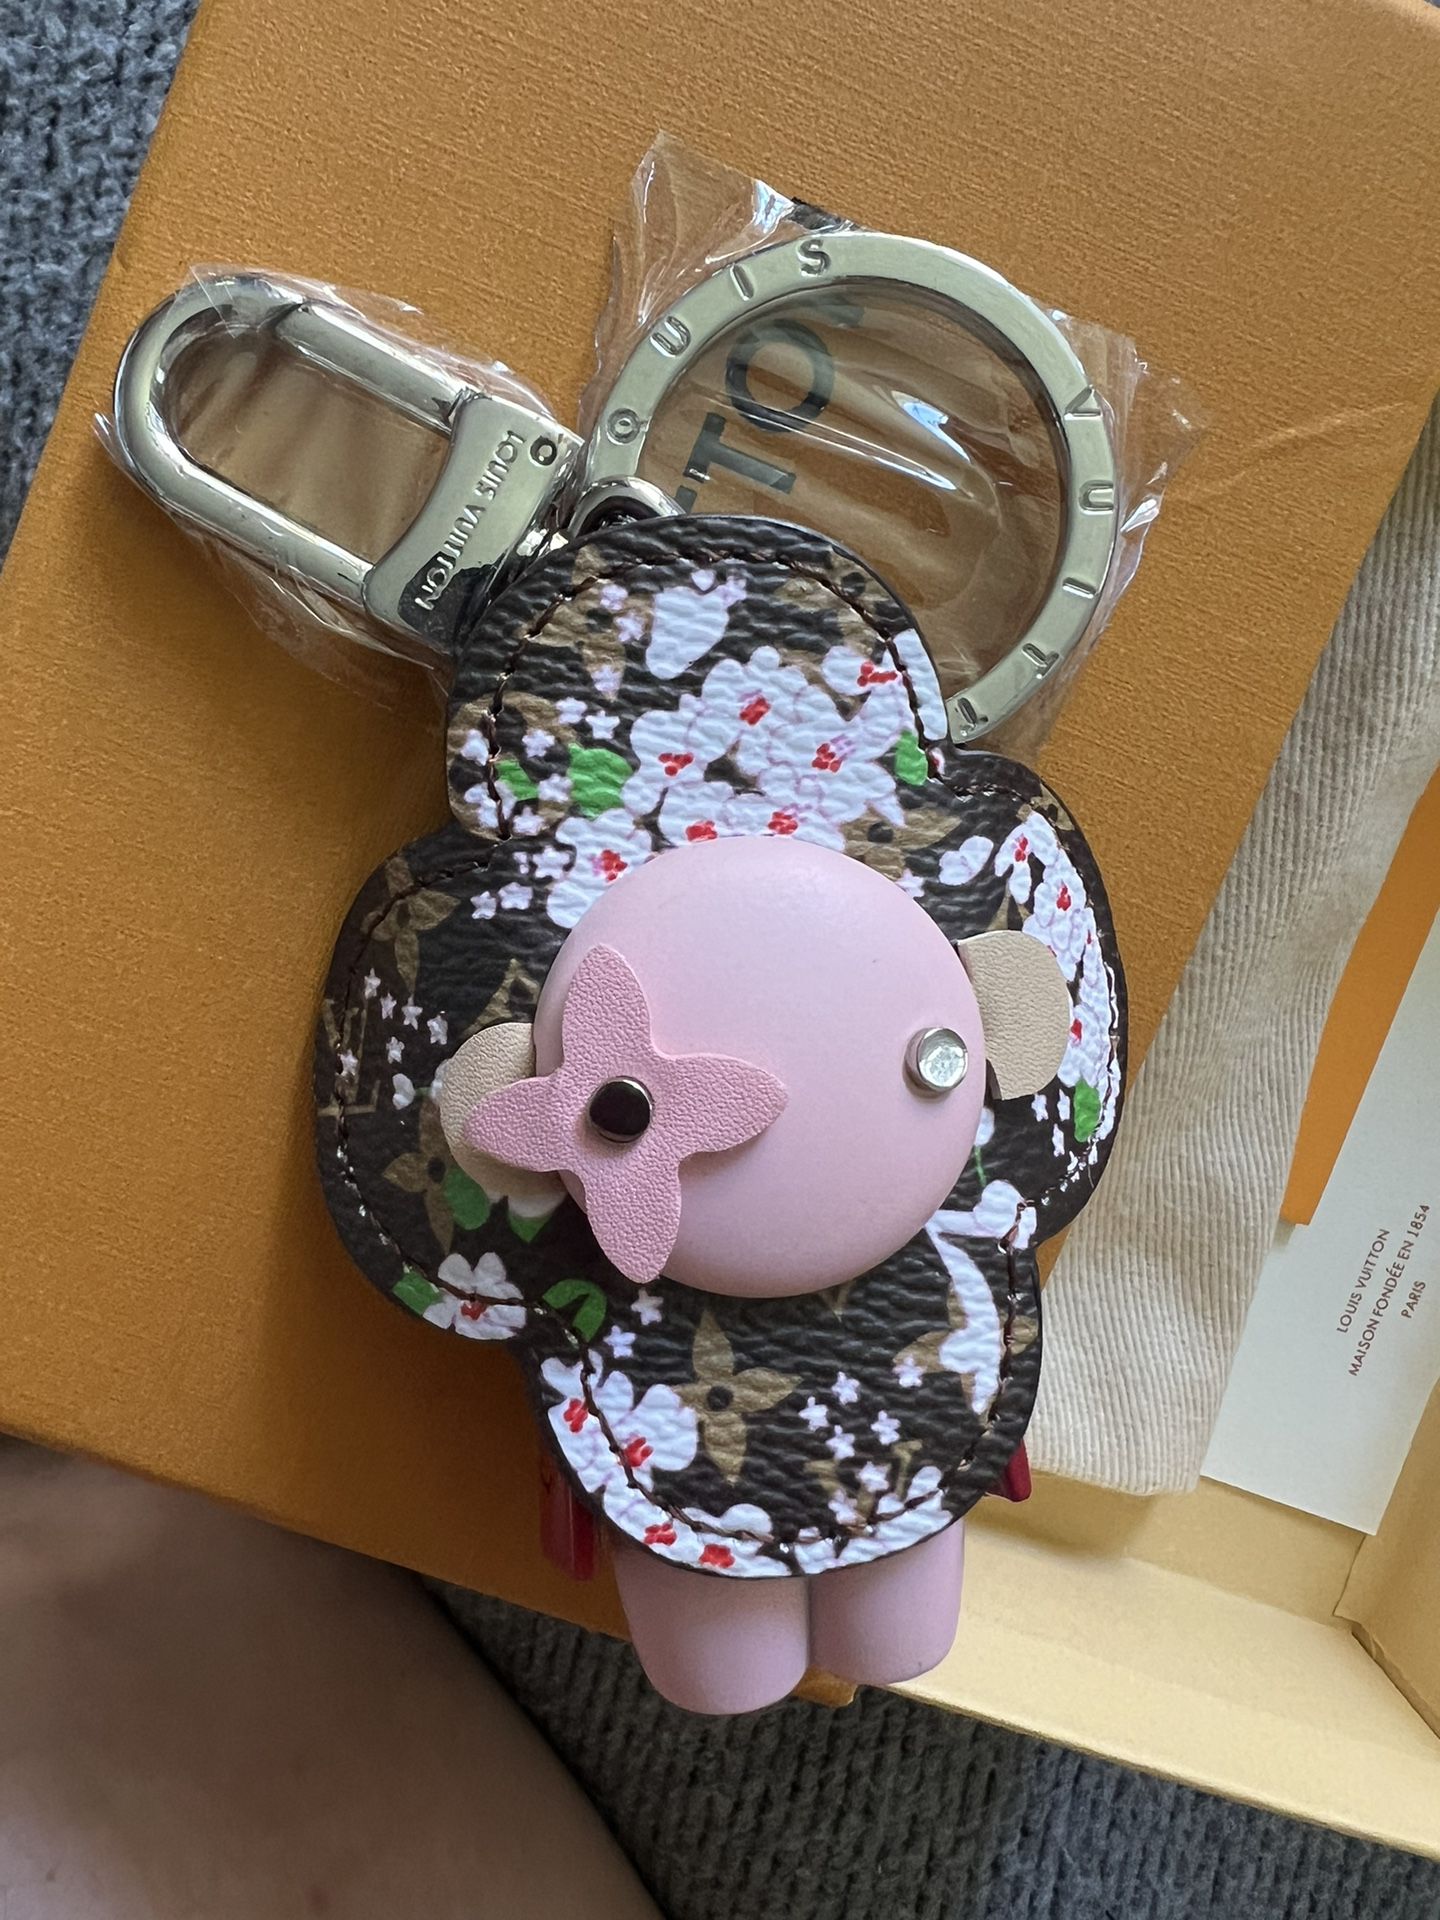 LOUIS VUITTON Cherry Blossom Vivienne Bag Charm for Sale in Irvine, CA -  OfferUp